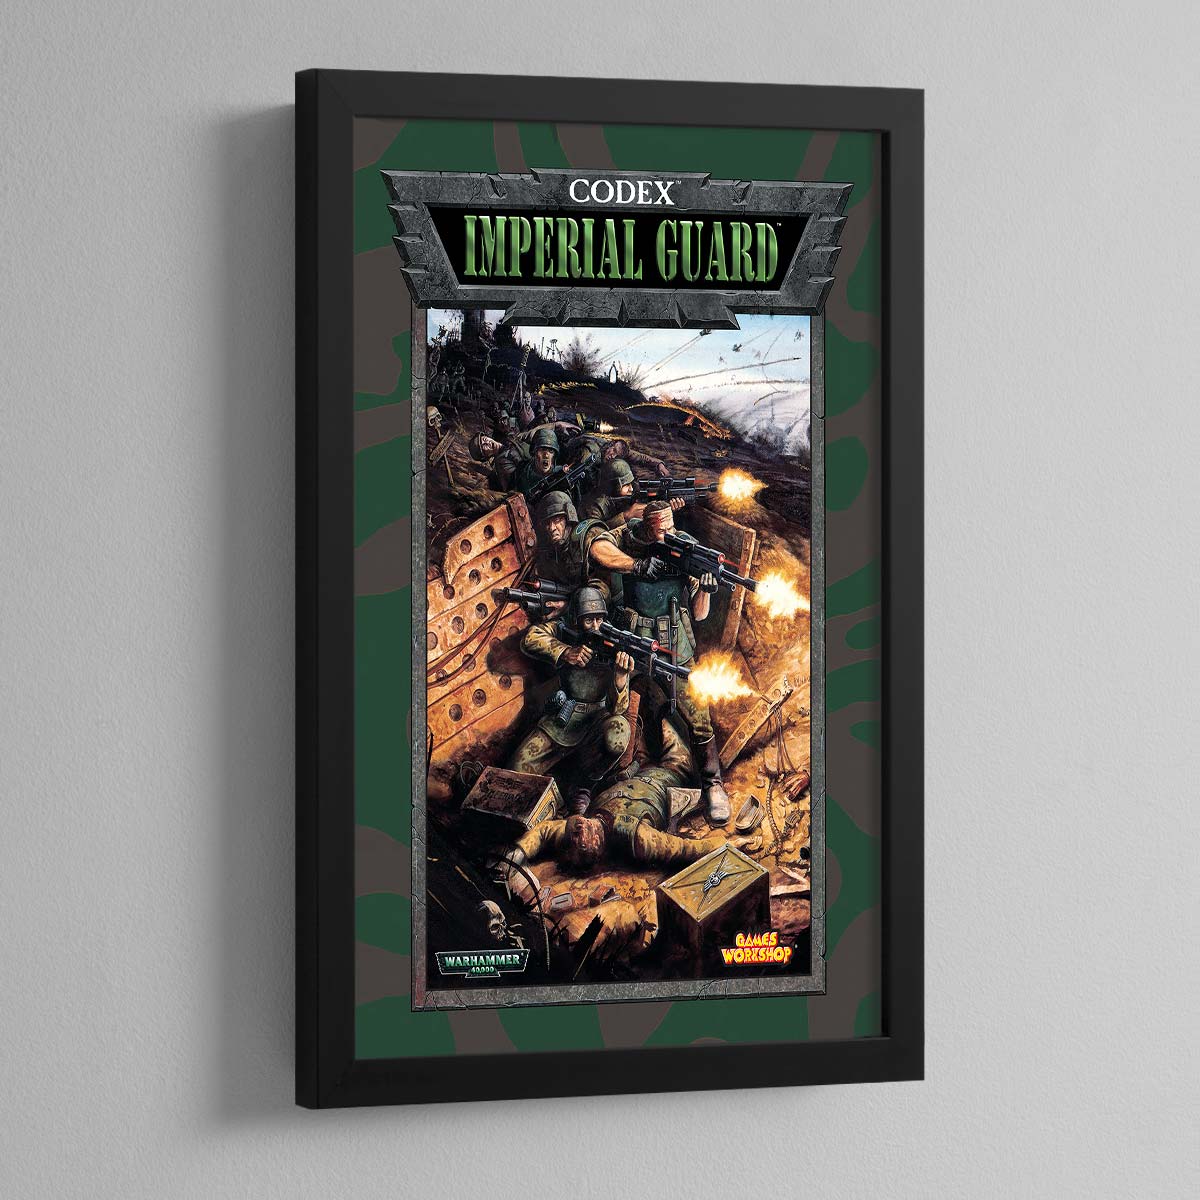 Warhammer 40,000 3rd Edition – Imperial Guard – Frame